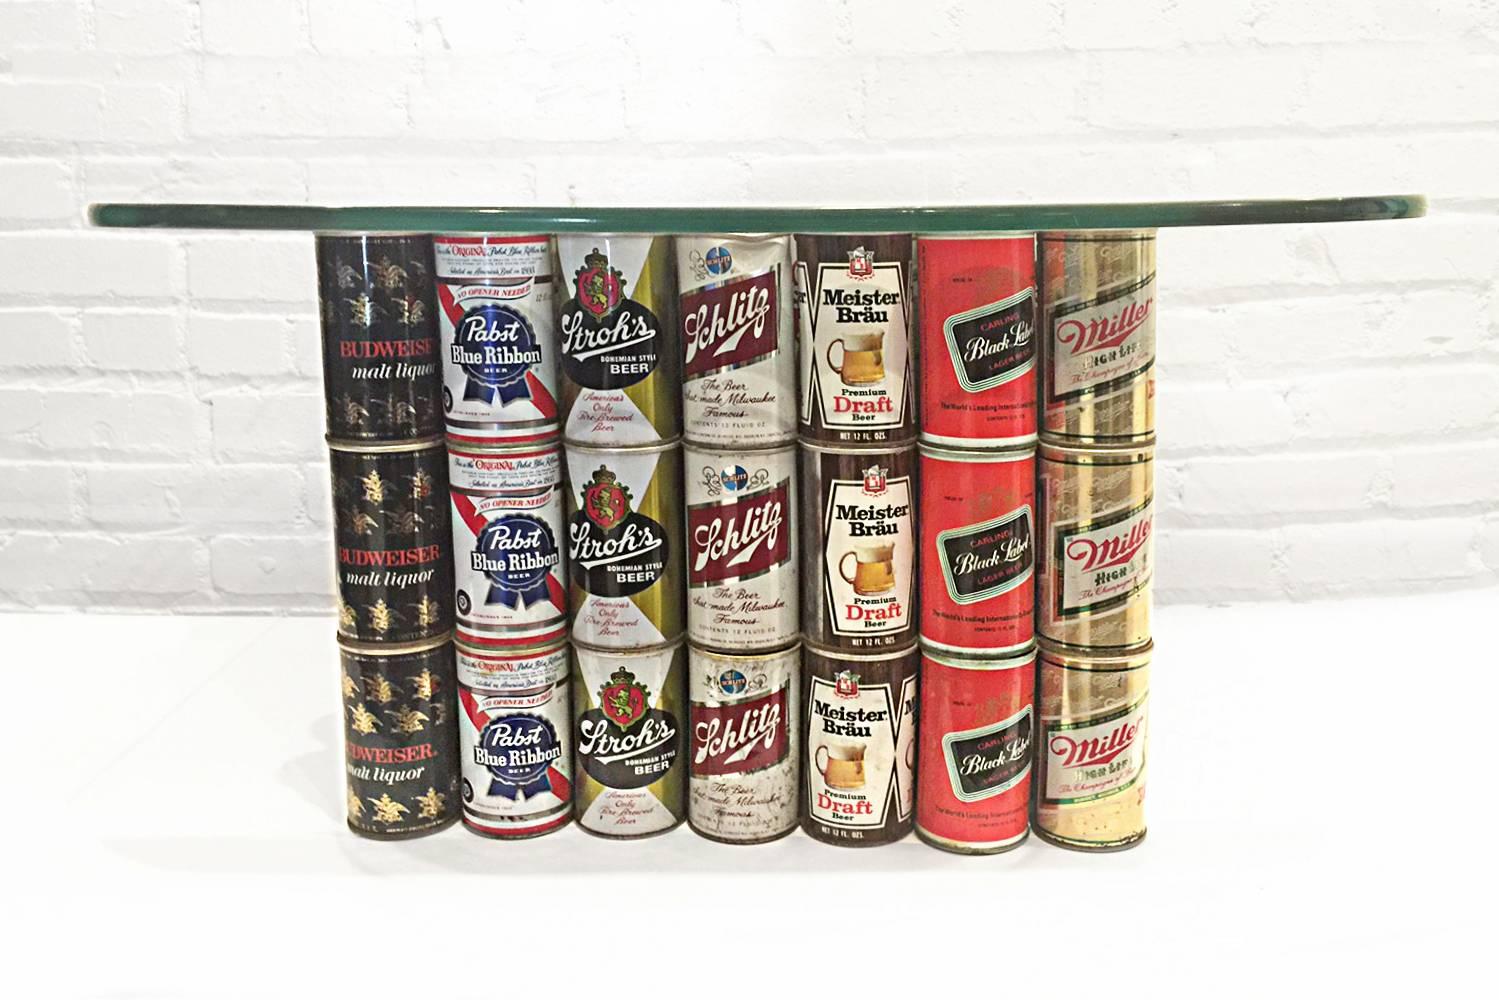 Absolute one of a kind Folk Art piece constructed of 147 vintage American beer cans. Brands include Budweiser, Schlitz, Strohs, Black Label, Iron City and several other classic beers from a bygone era. Superb Breweriana collectible.

Glass top not